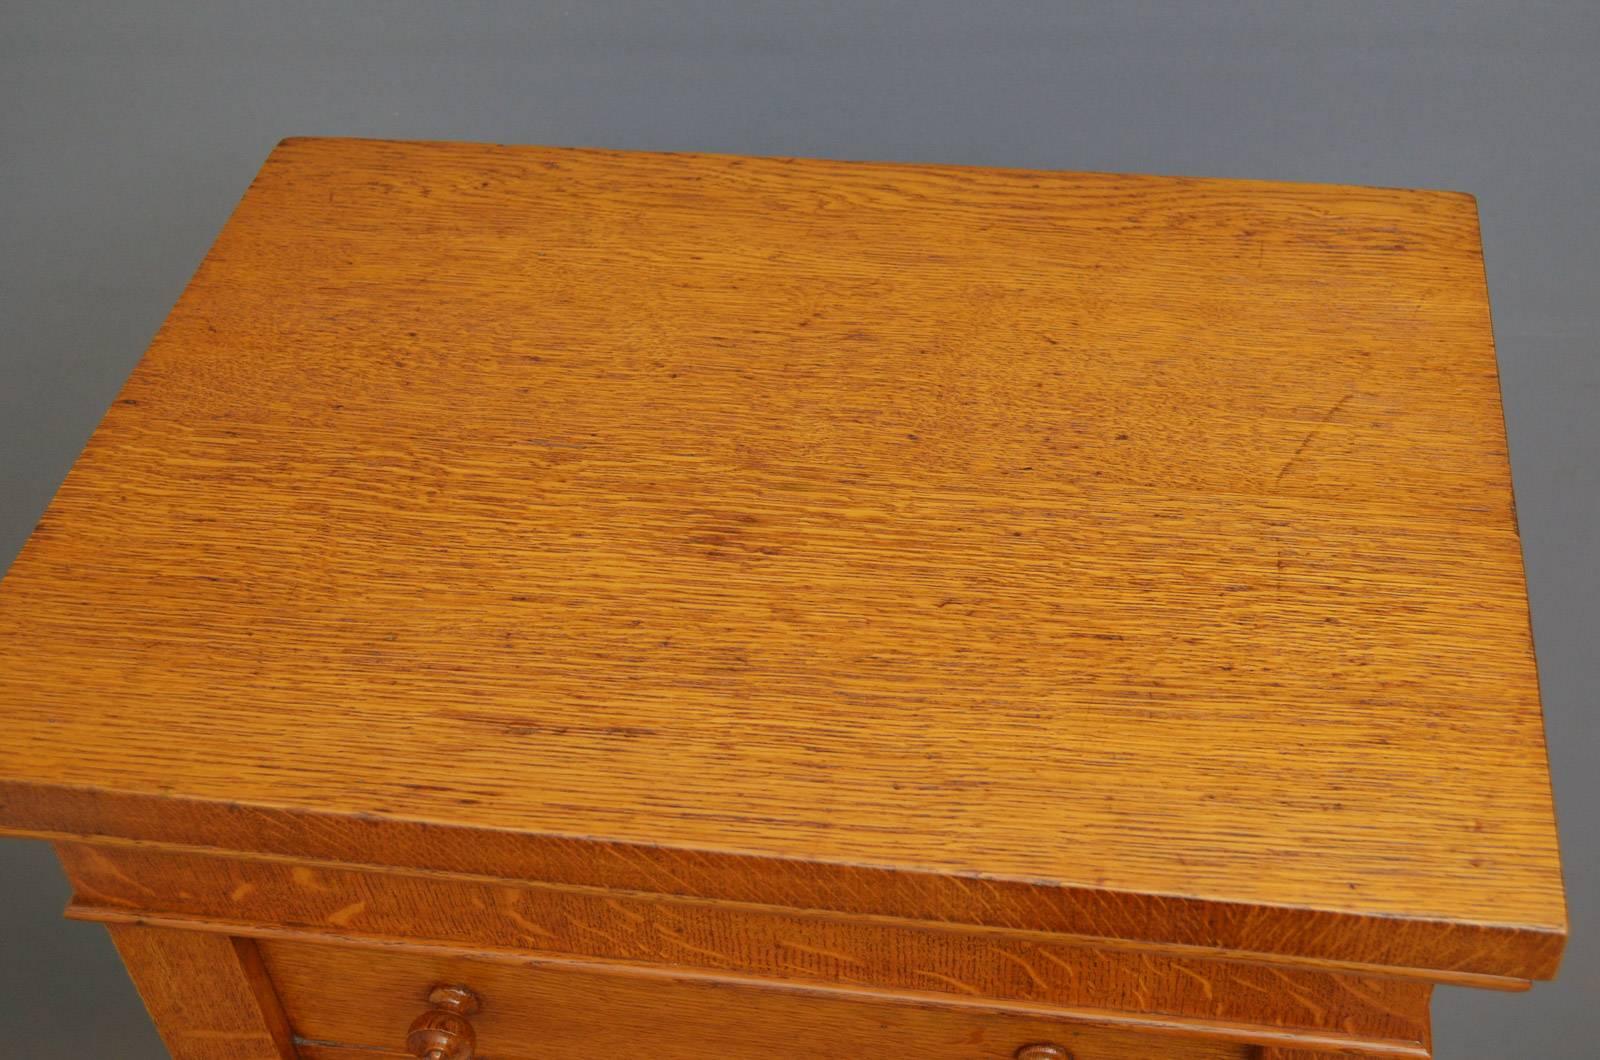 Sn4249. Very unusual Victorian oak cabinet of Wellington chest design, having moulded top above a cupboard door enclosing 3 height adjustable shelves flanked by pilasters fitted with original working lock and a key, all sanding on plinth base. This